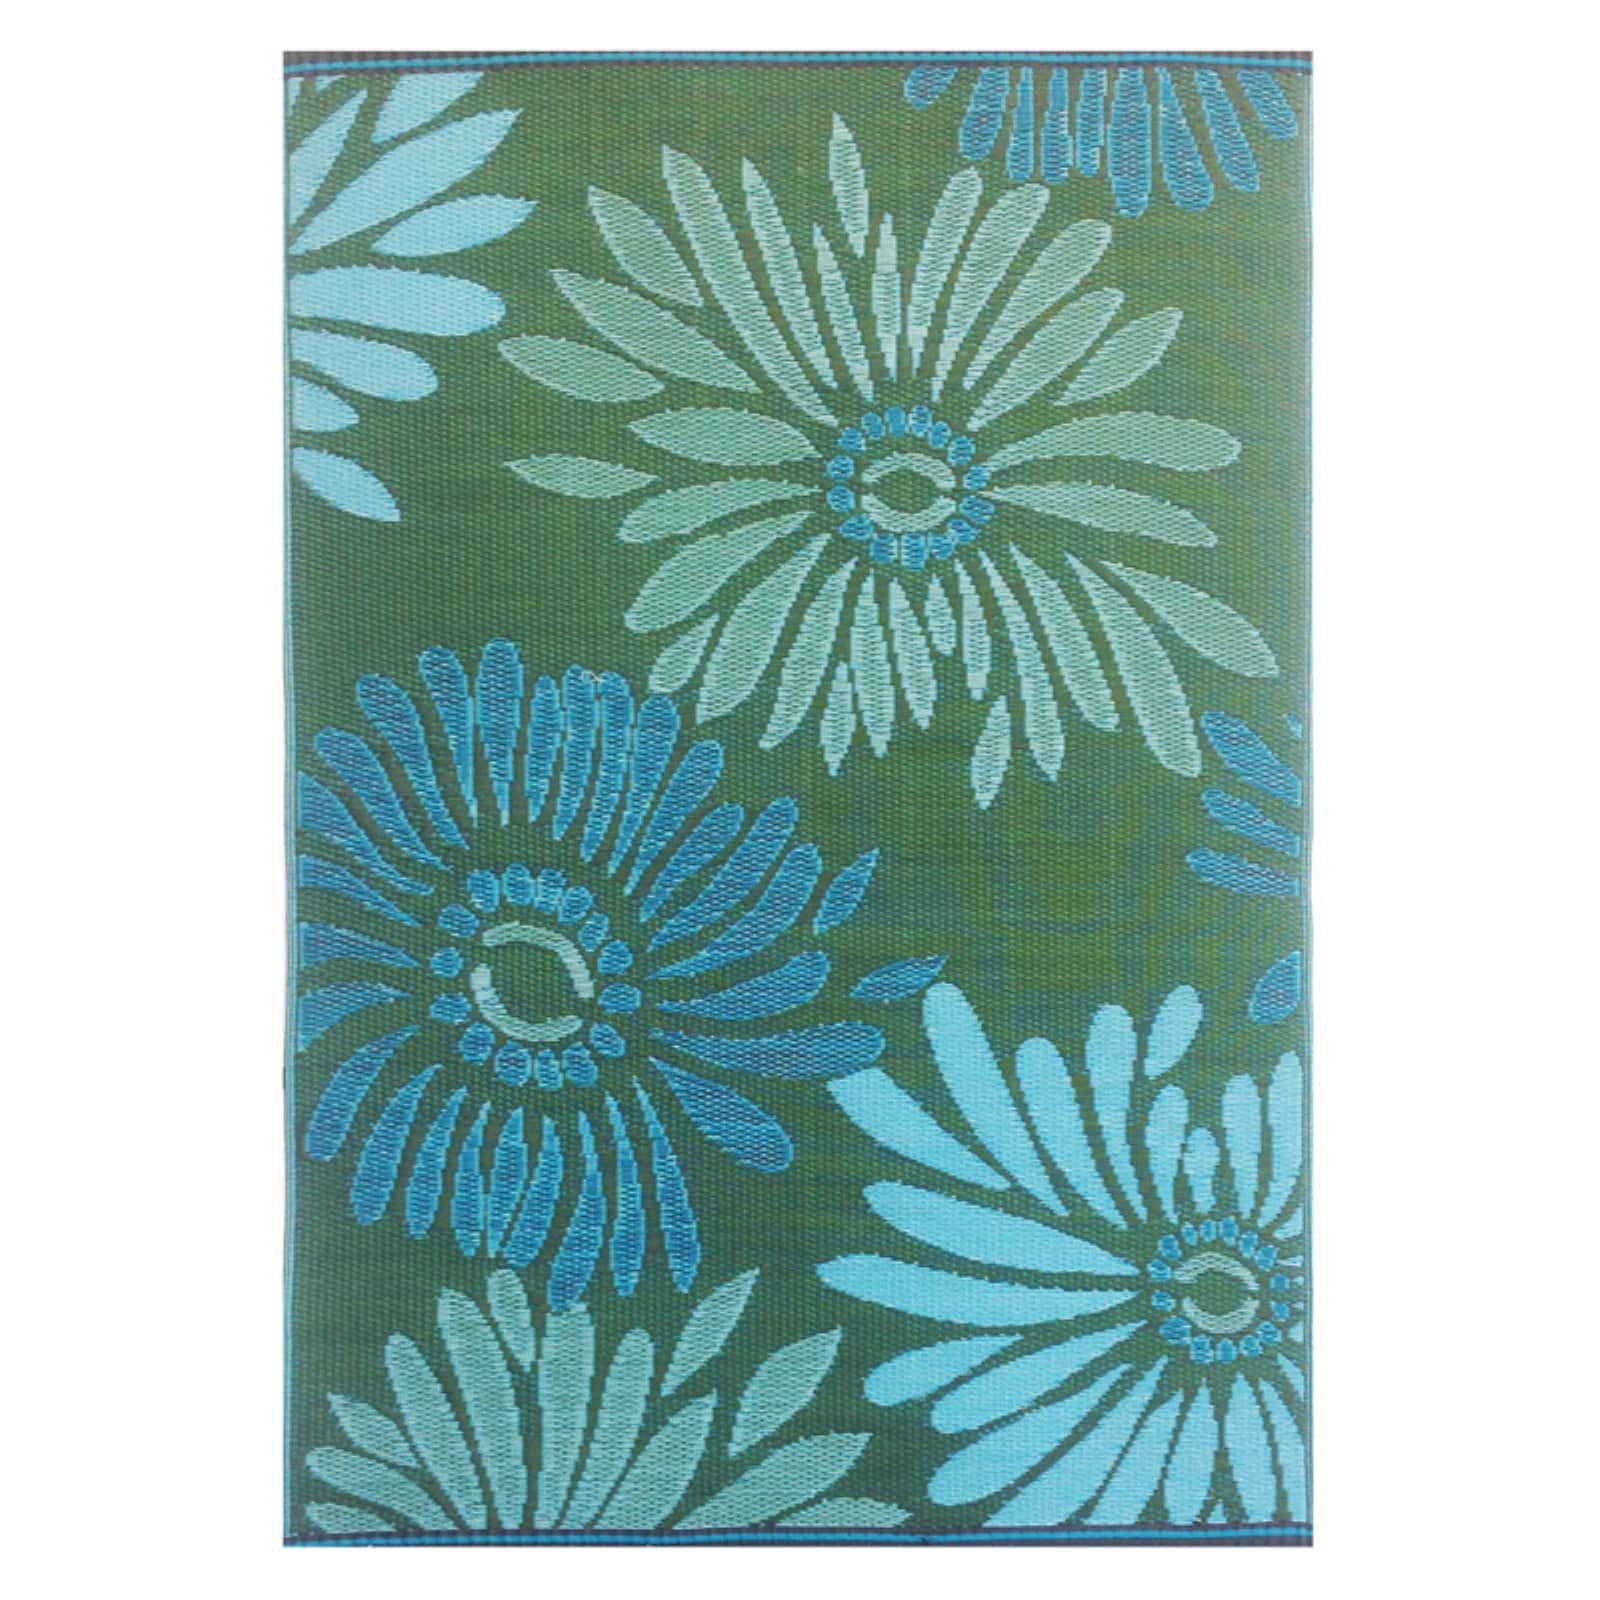 Mad Mats Daisy Outdoor Area Rug - image 2 of 4